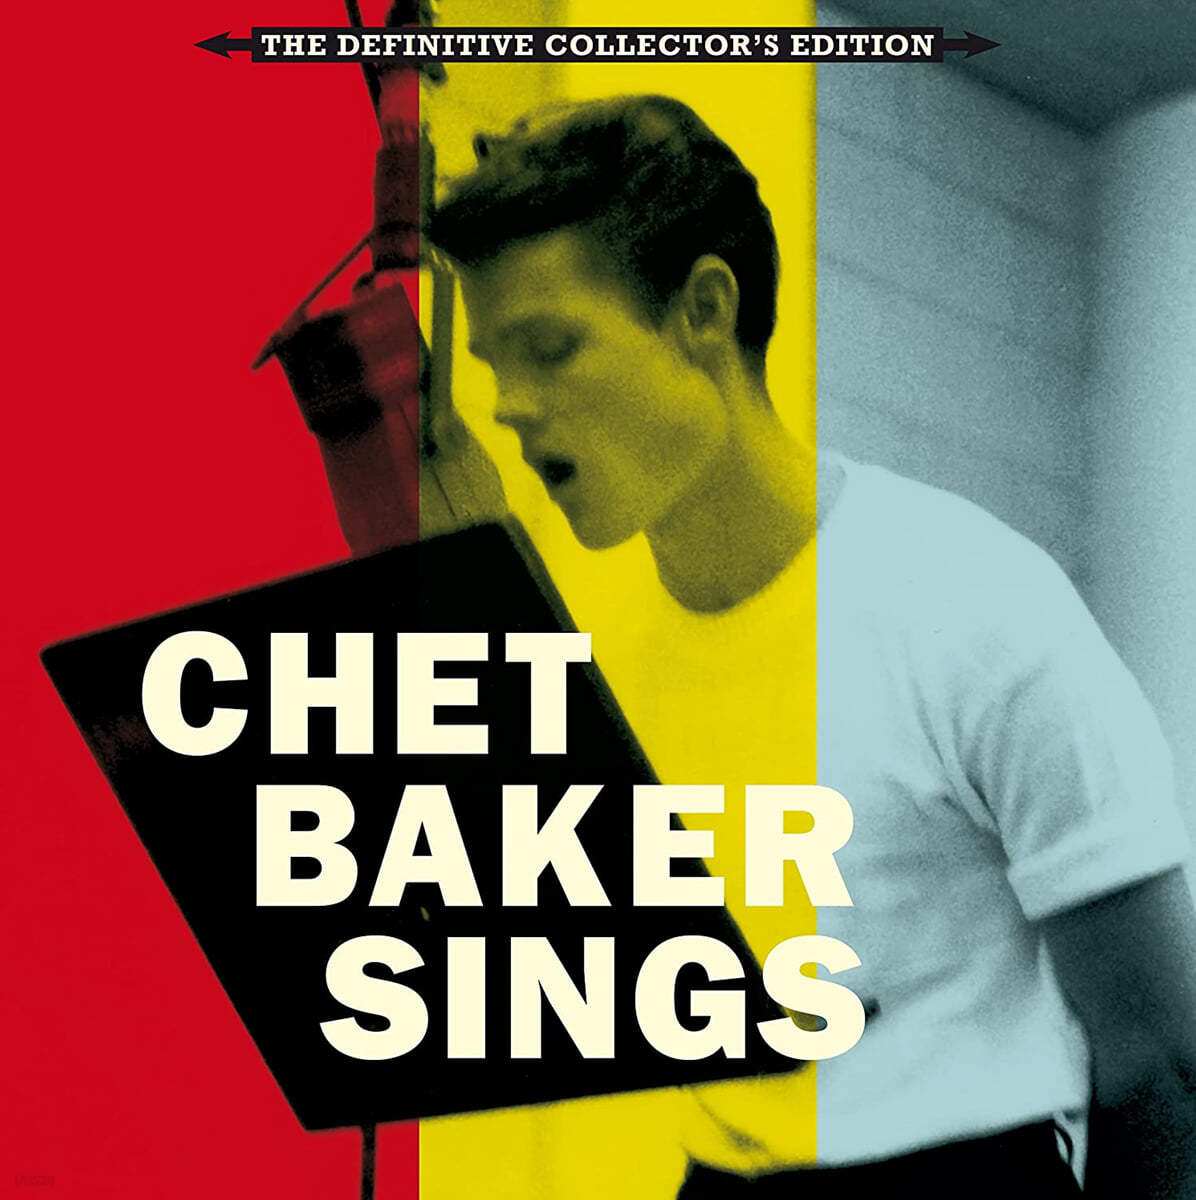 Chet Baker (쳇 베이커) - Sings (The Definitive Collector’s Edition) [LP+CD]